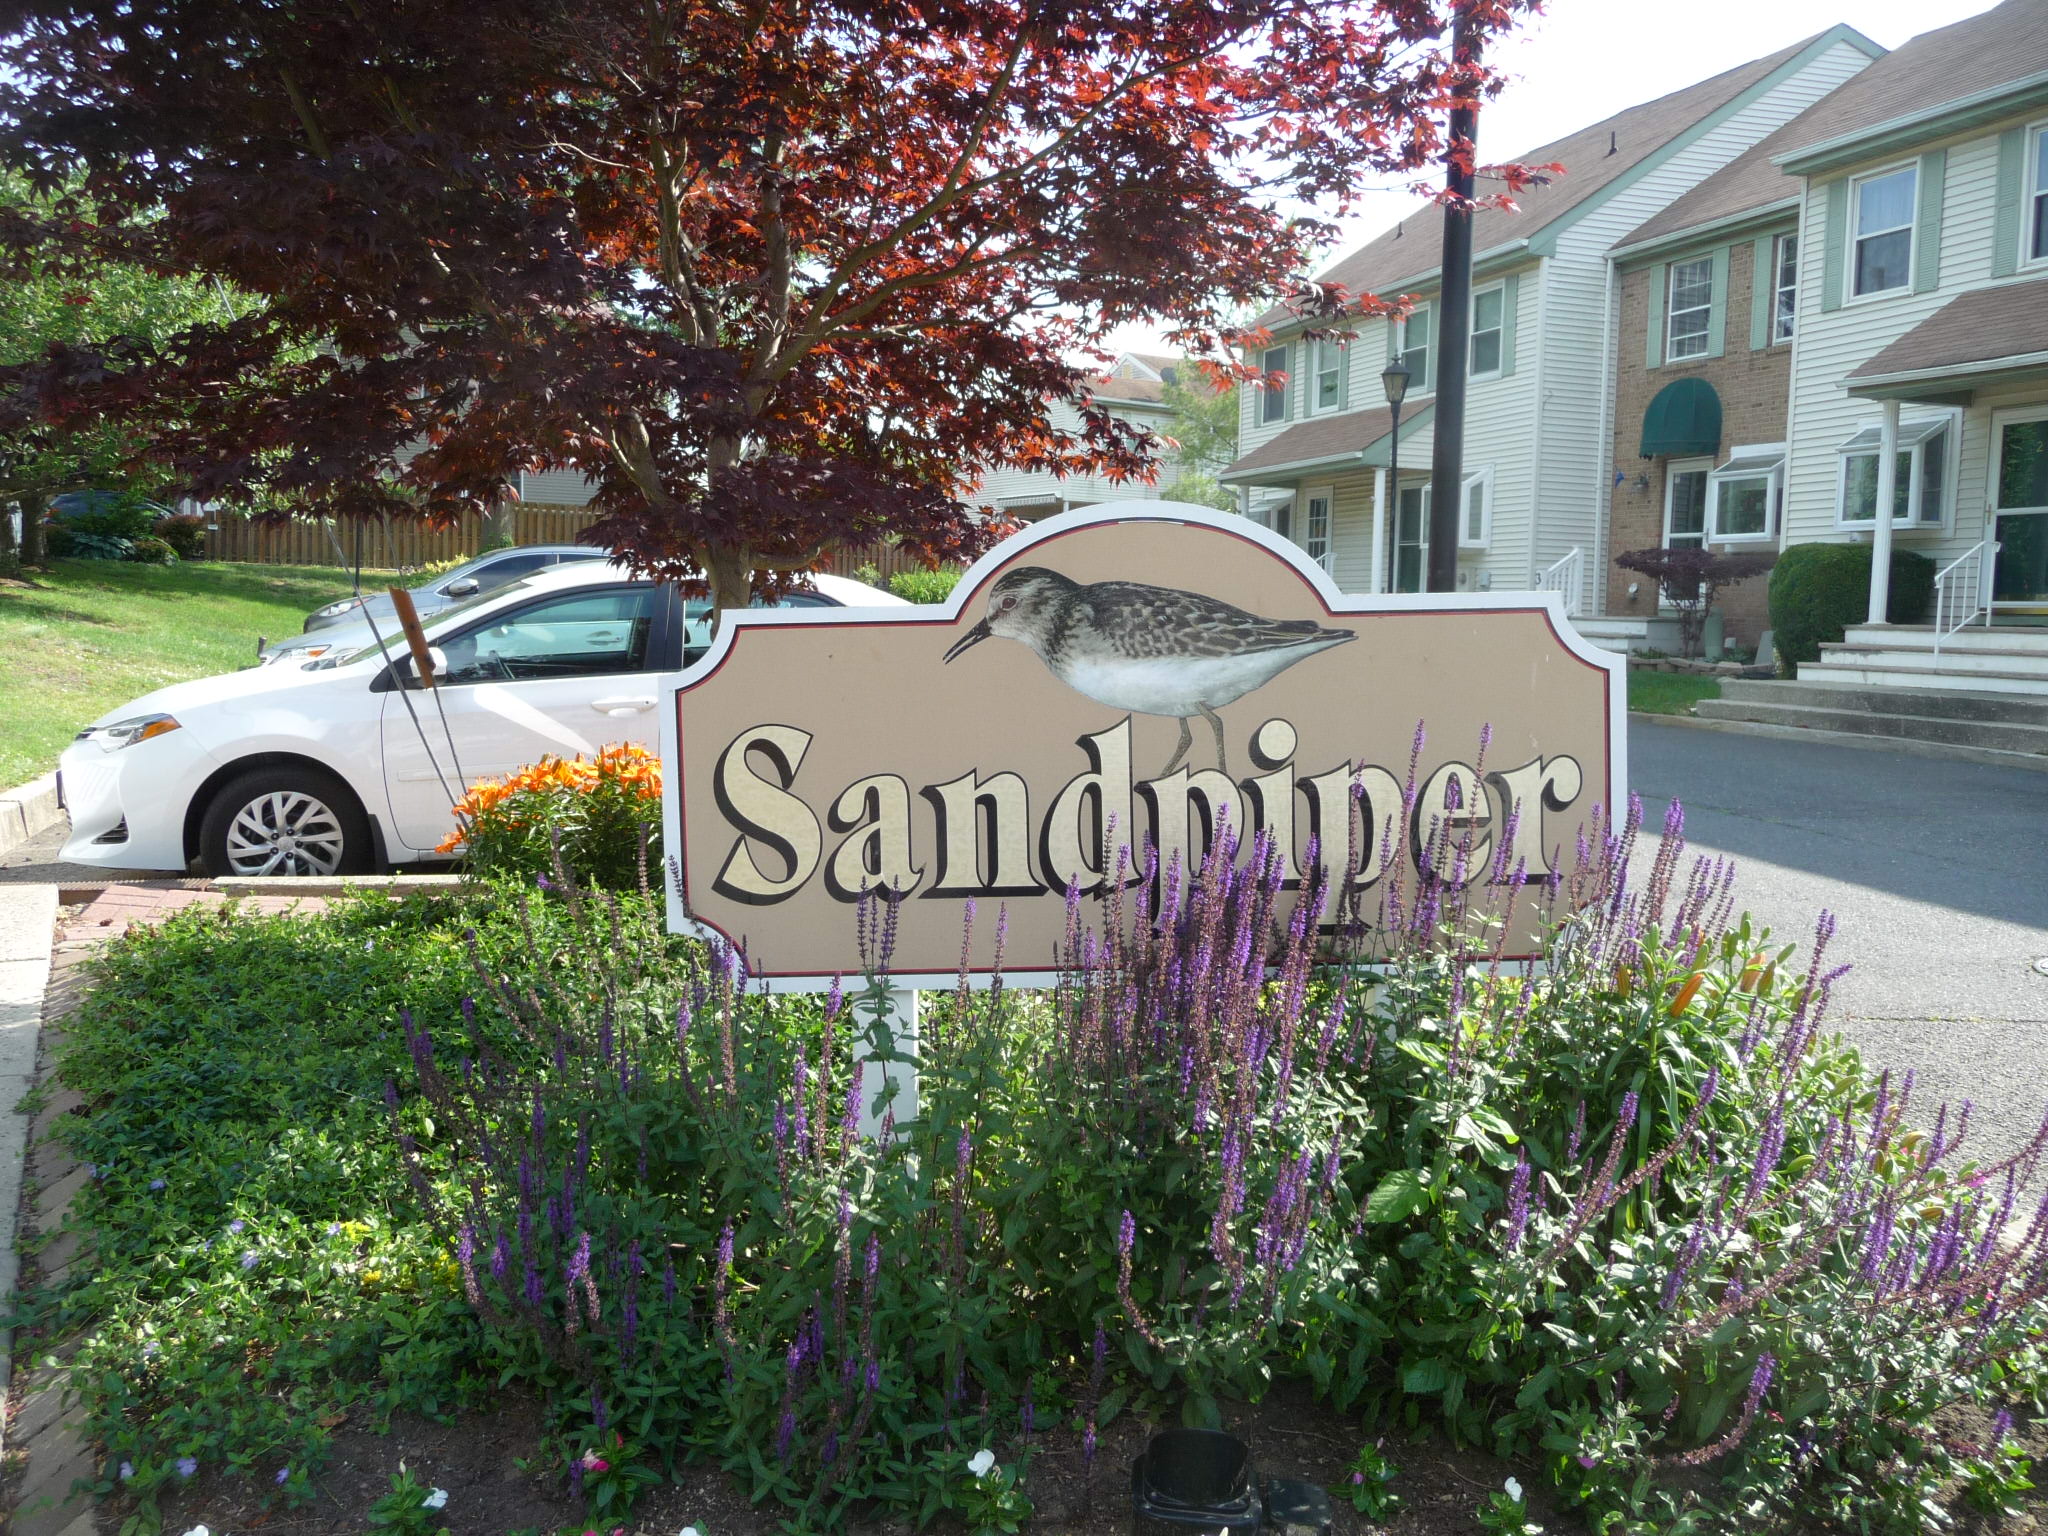 Entry sign and buildings in Sandpiper.